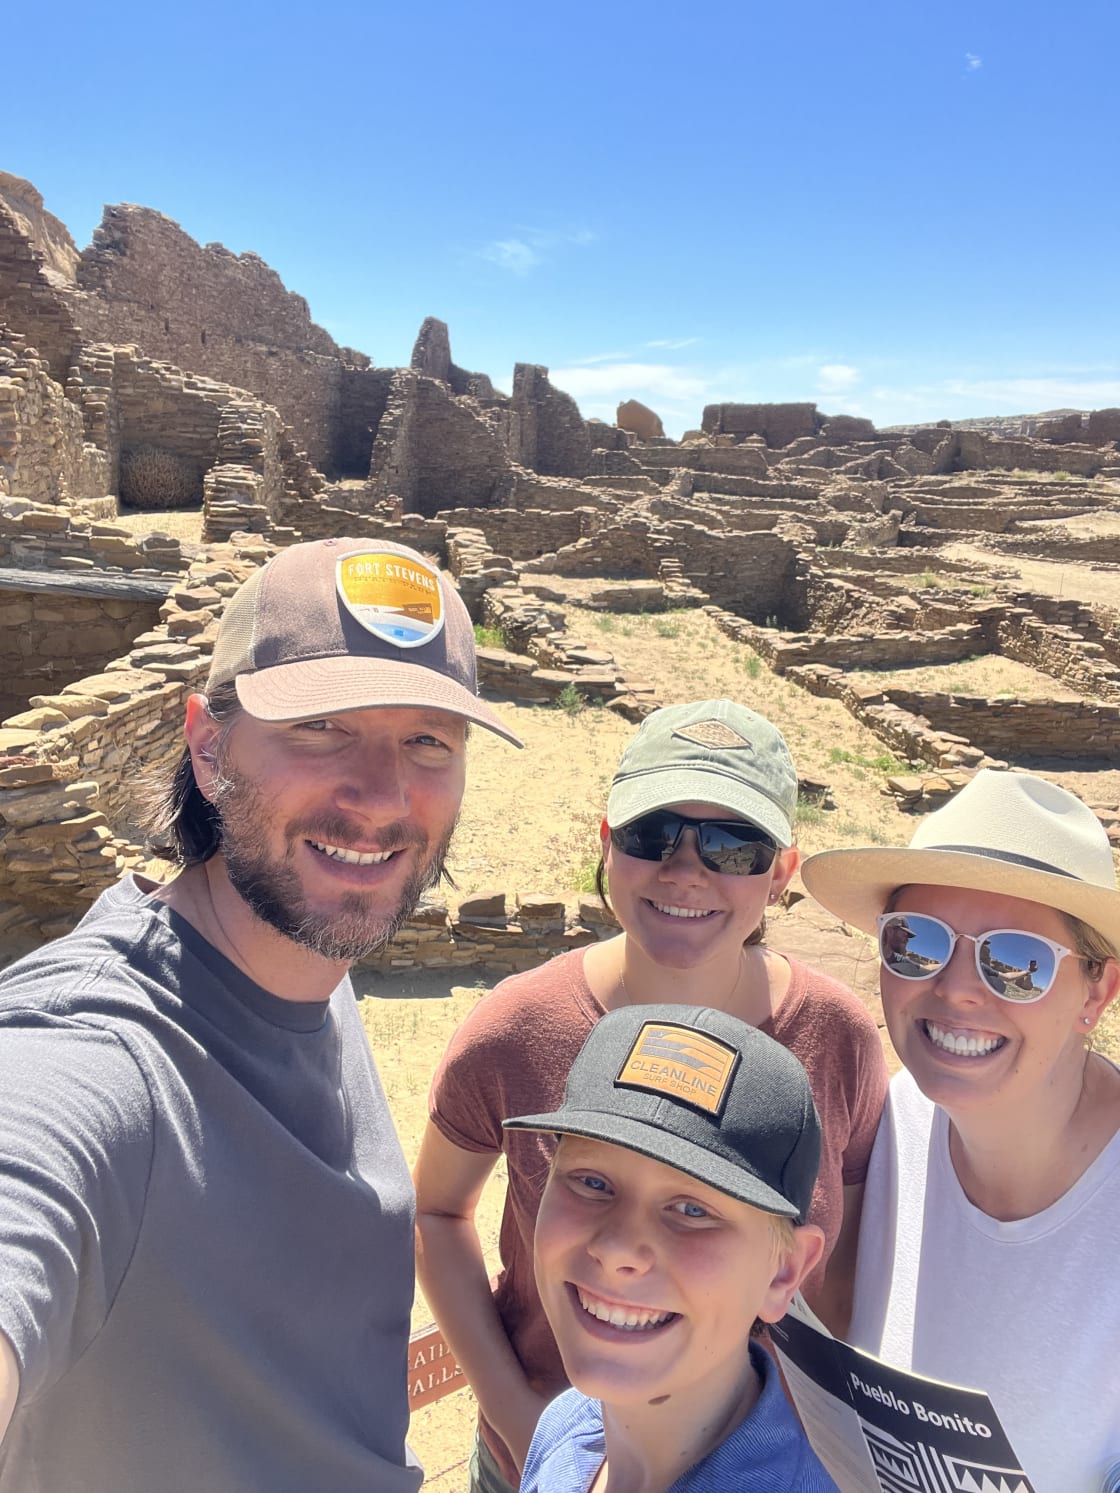 Chaco Canyon, about 30 minutes from Horse Thief campground, much closer than any other option!